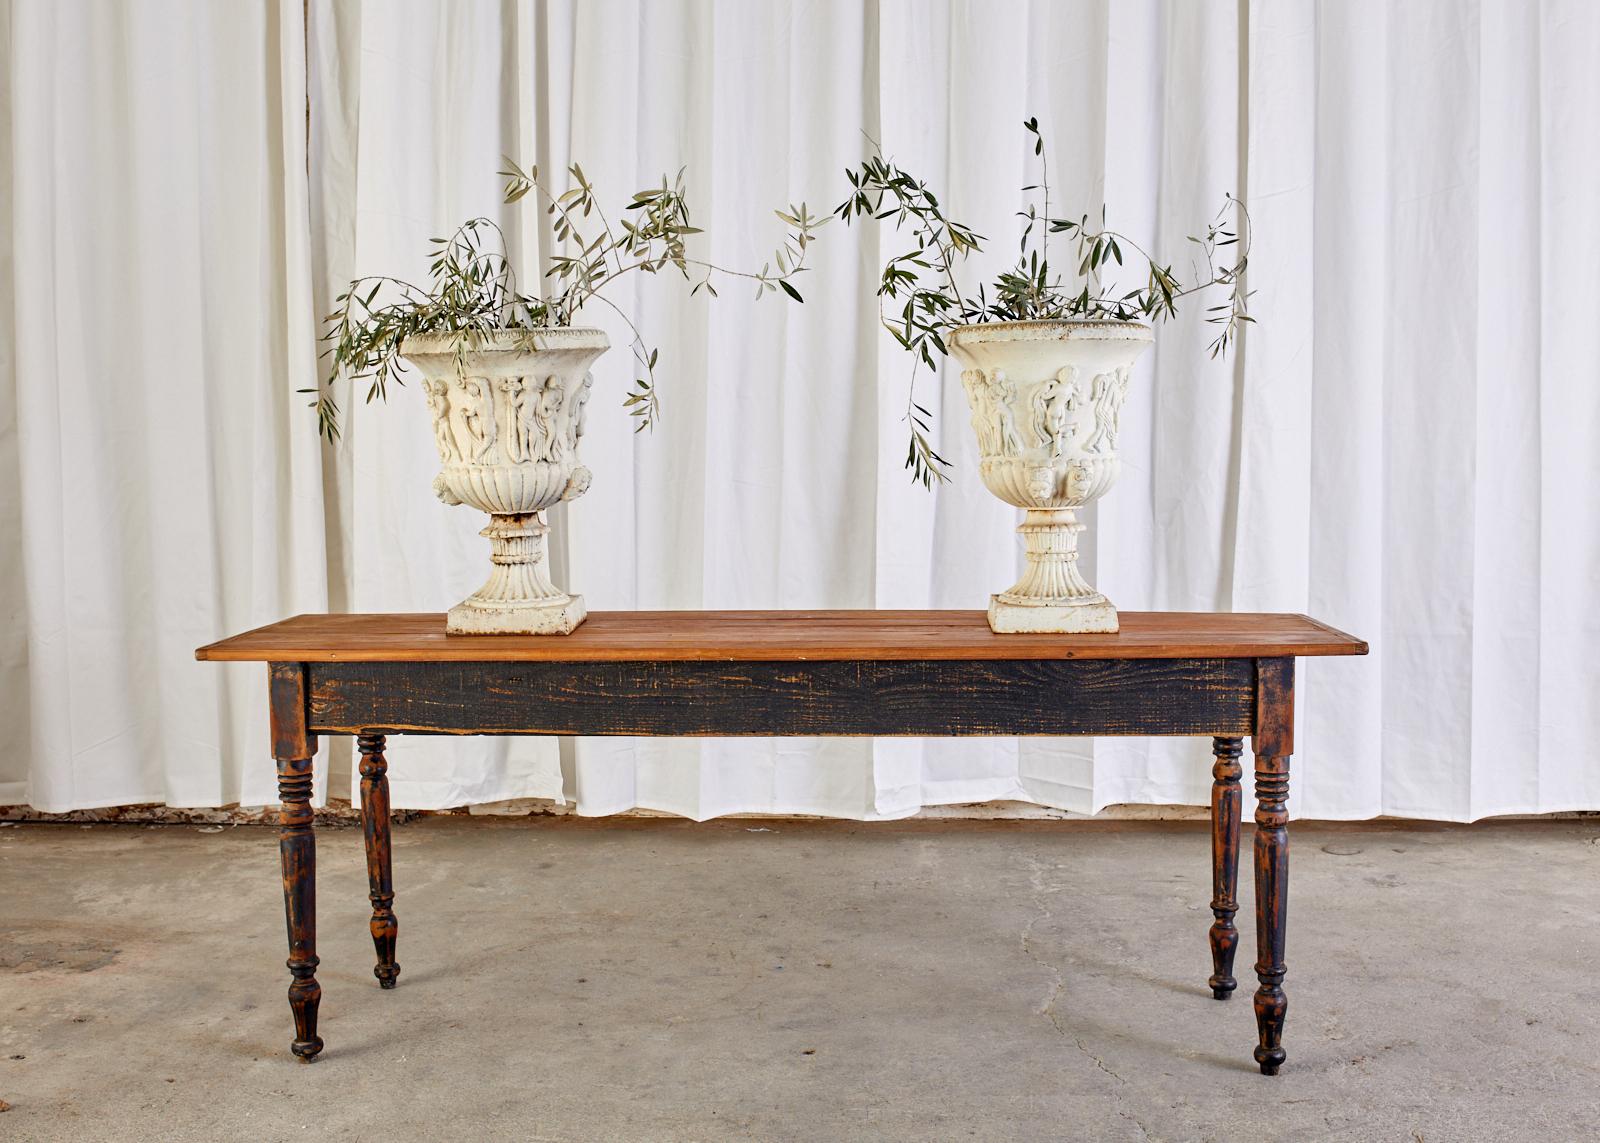 Rustic country French Provincial pine farm table or console table. The table features an intentionally distressed painted finish on the base topped with planks having bread board ends. The table is dining height at 29 inches making it a very